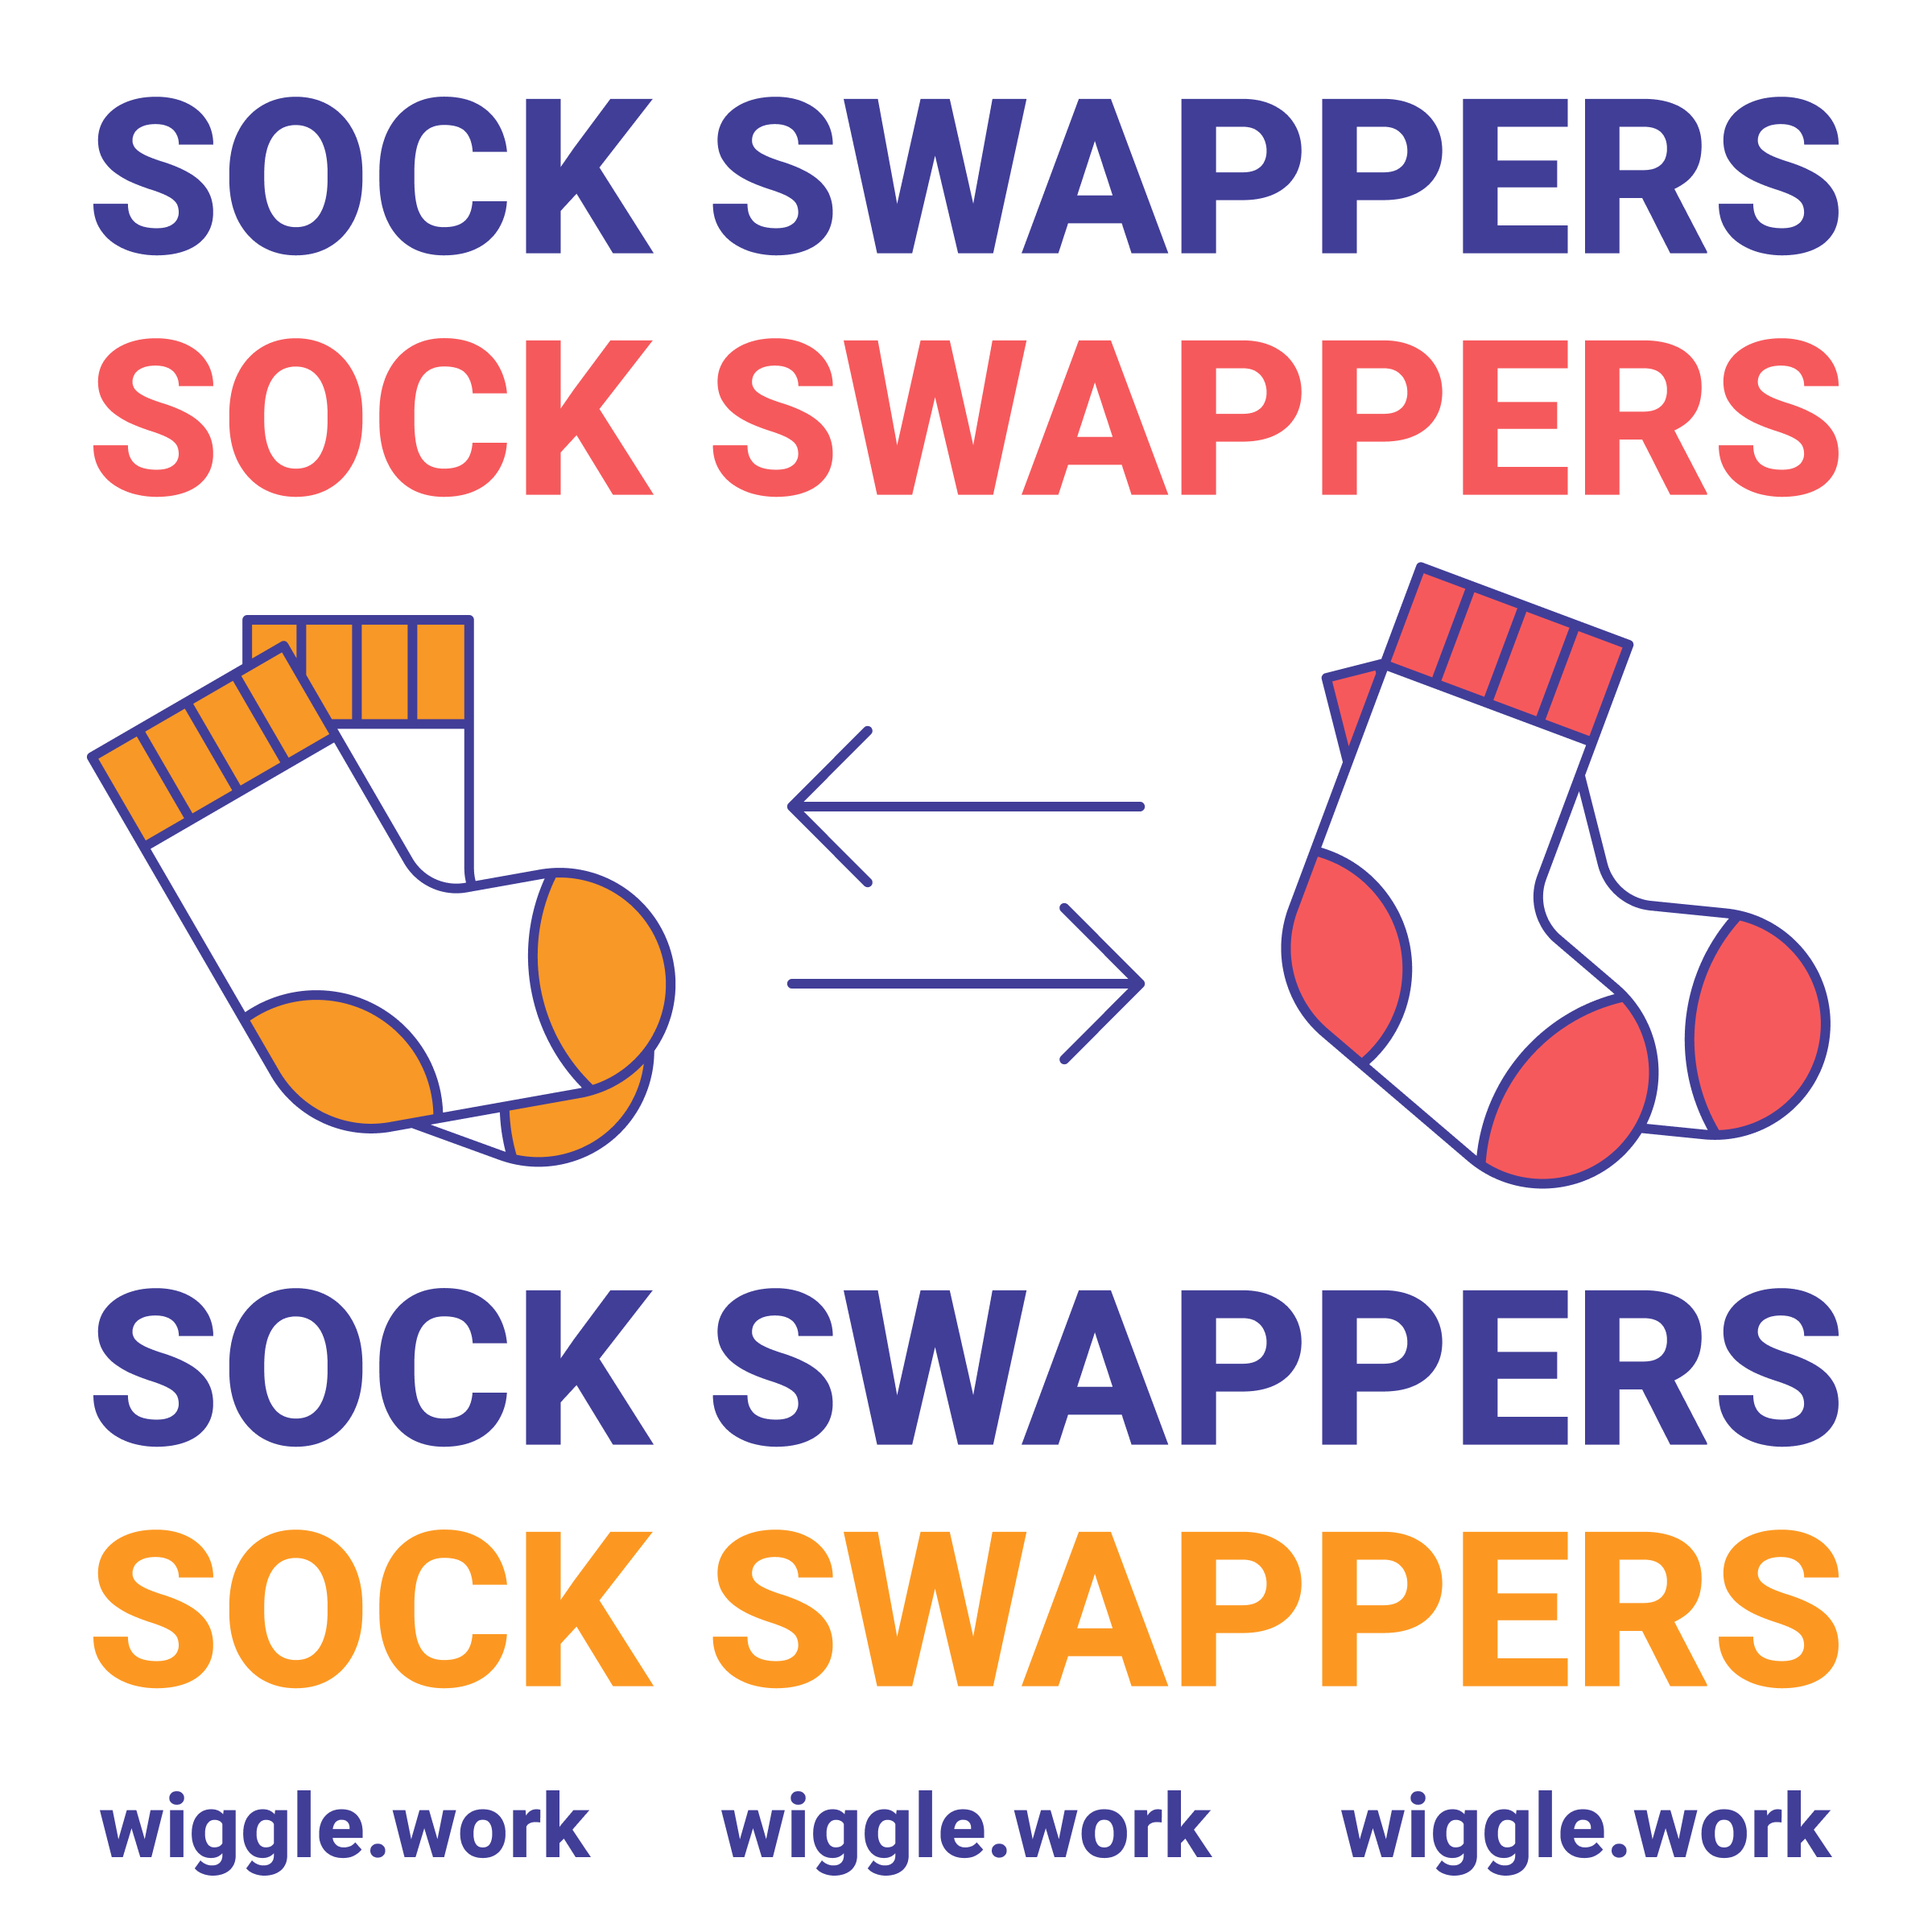 Sock Swappers text and icon graphic